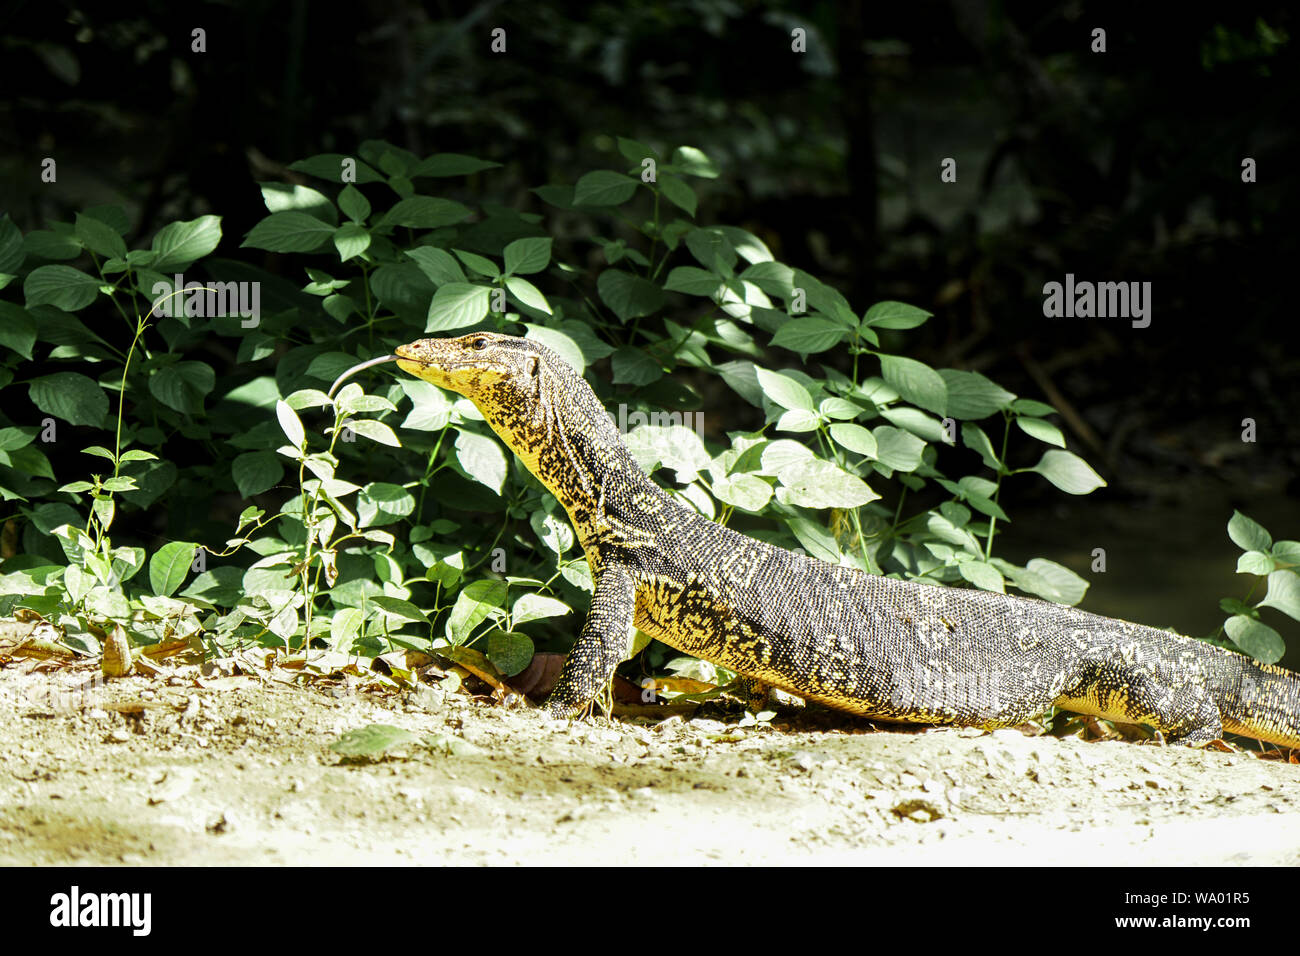 A Water Monitor found in West Thailand nearby the Erawan Nation Park. There are very big and colorful. Its from the Squamata family, Lizards. Stock Photo